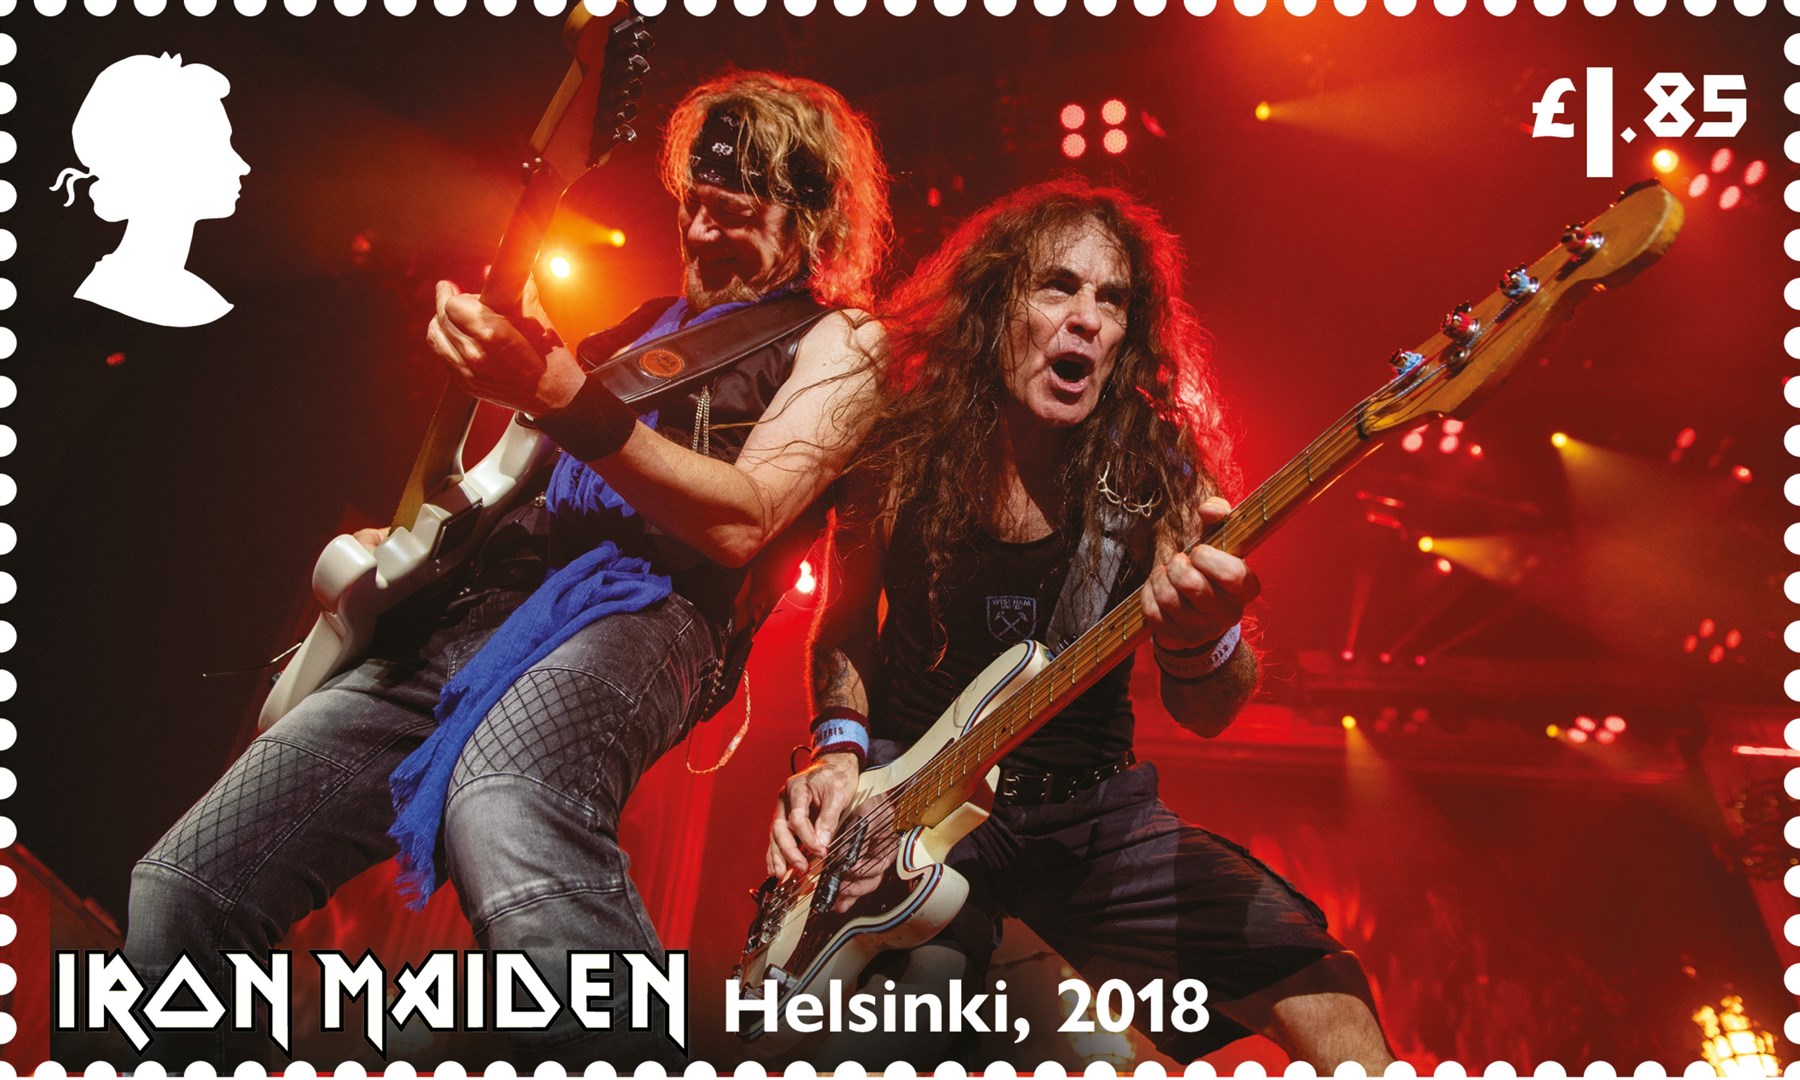 The band do their thing in Helsinki, 2018.